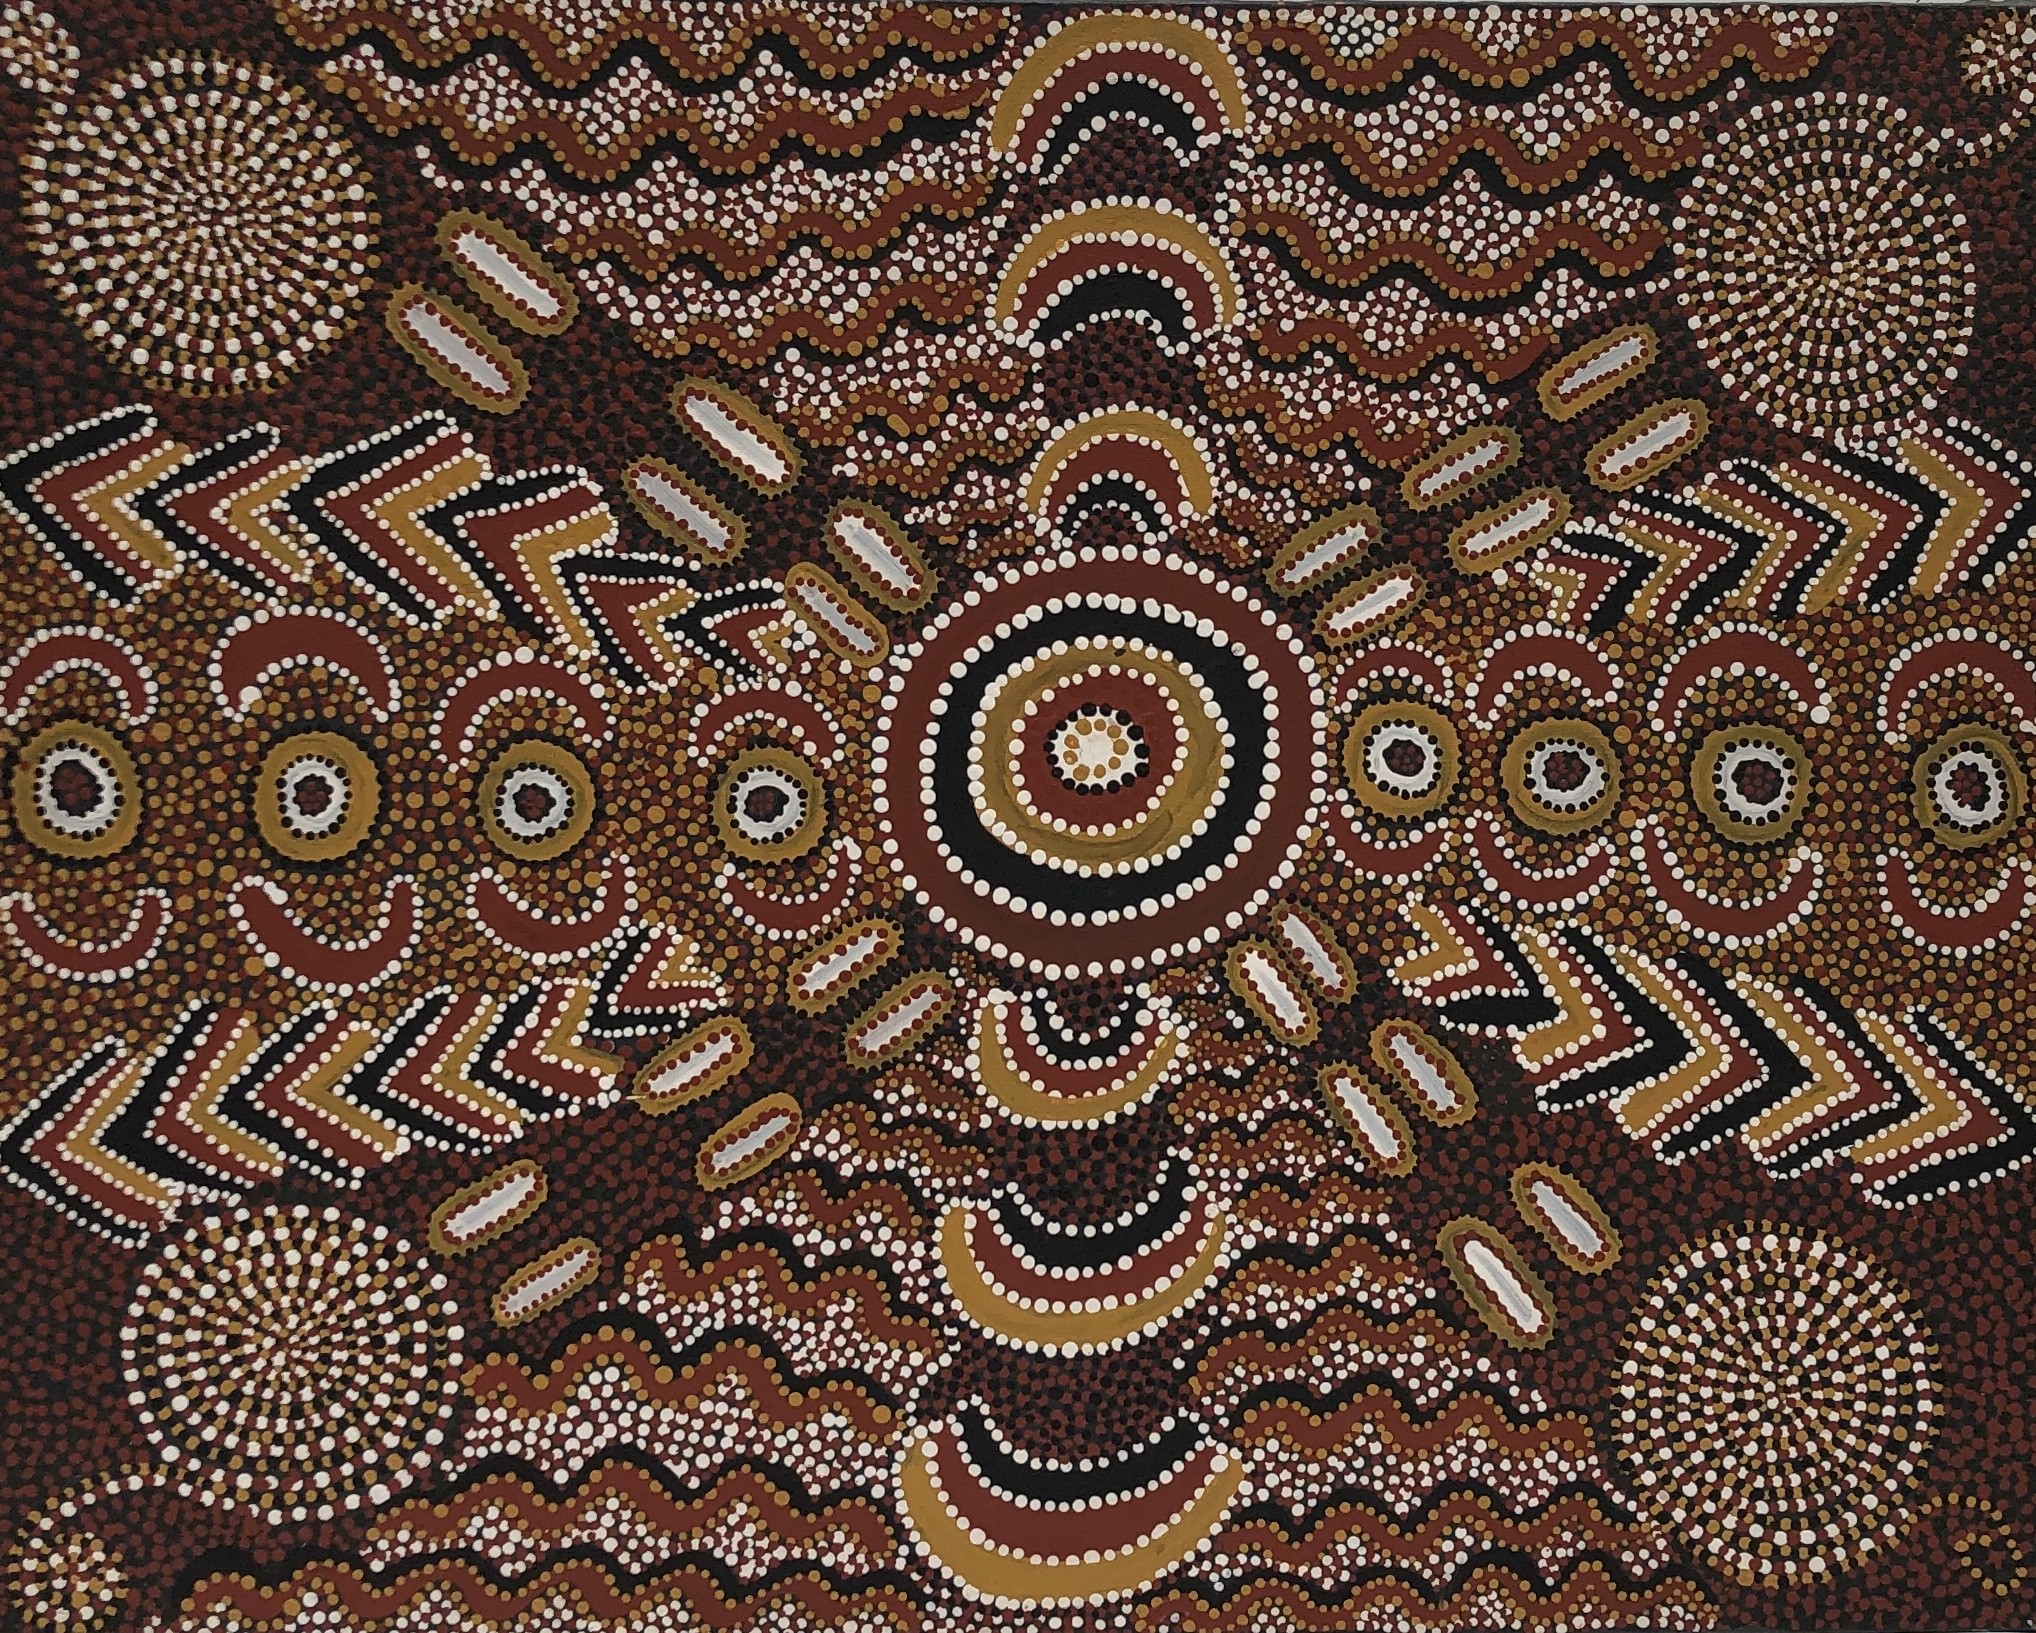 Untitled Aboriginal Dot Painting By Margaret Turner Petyarre | The